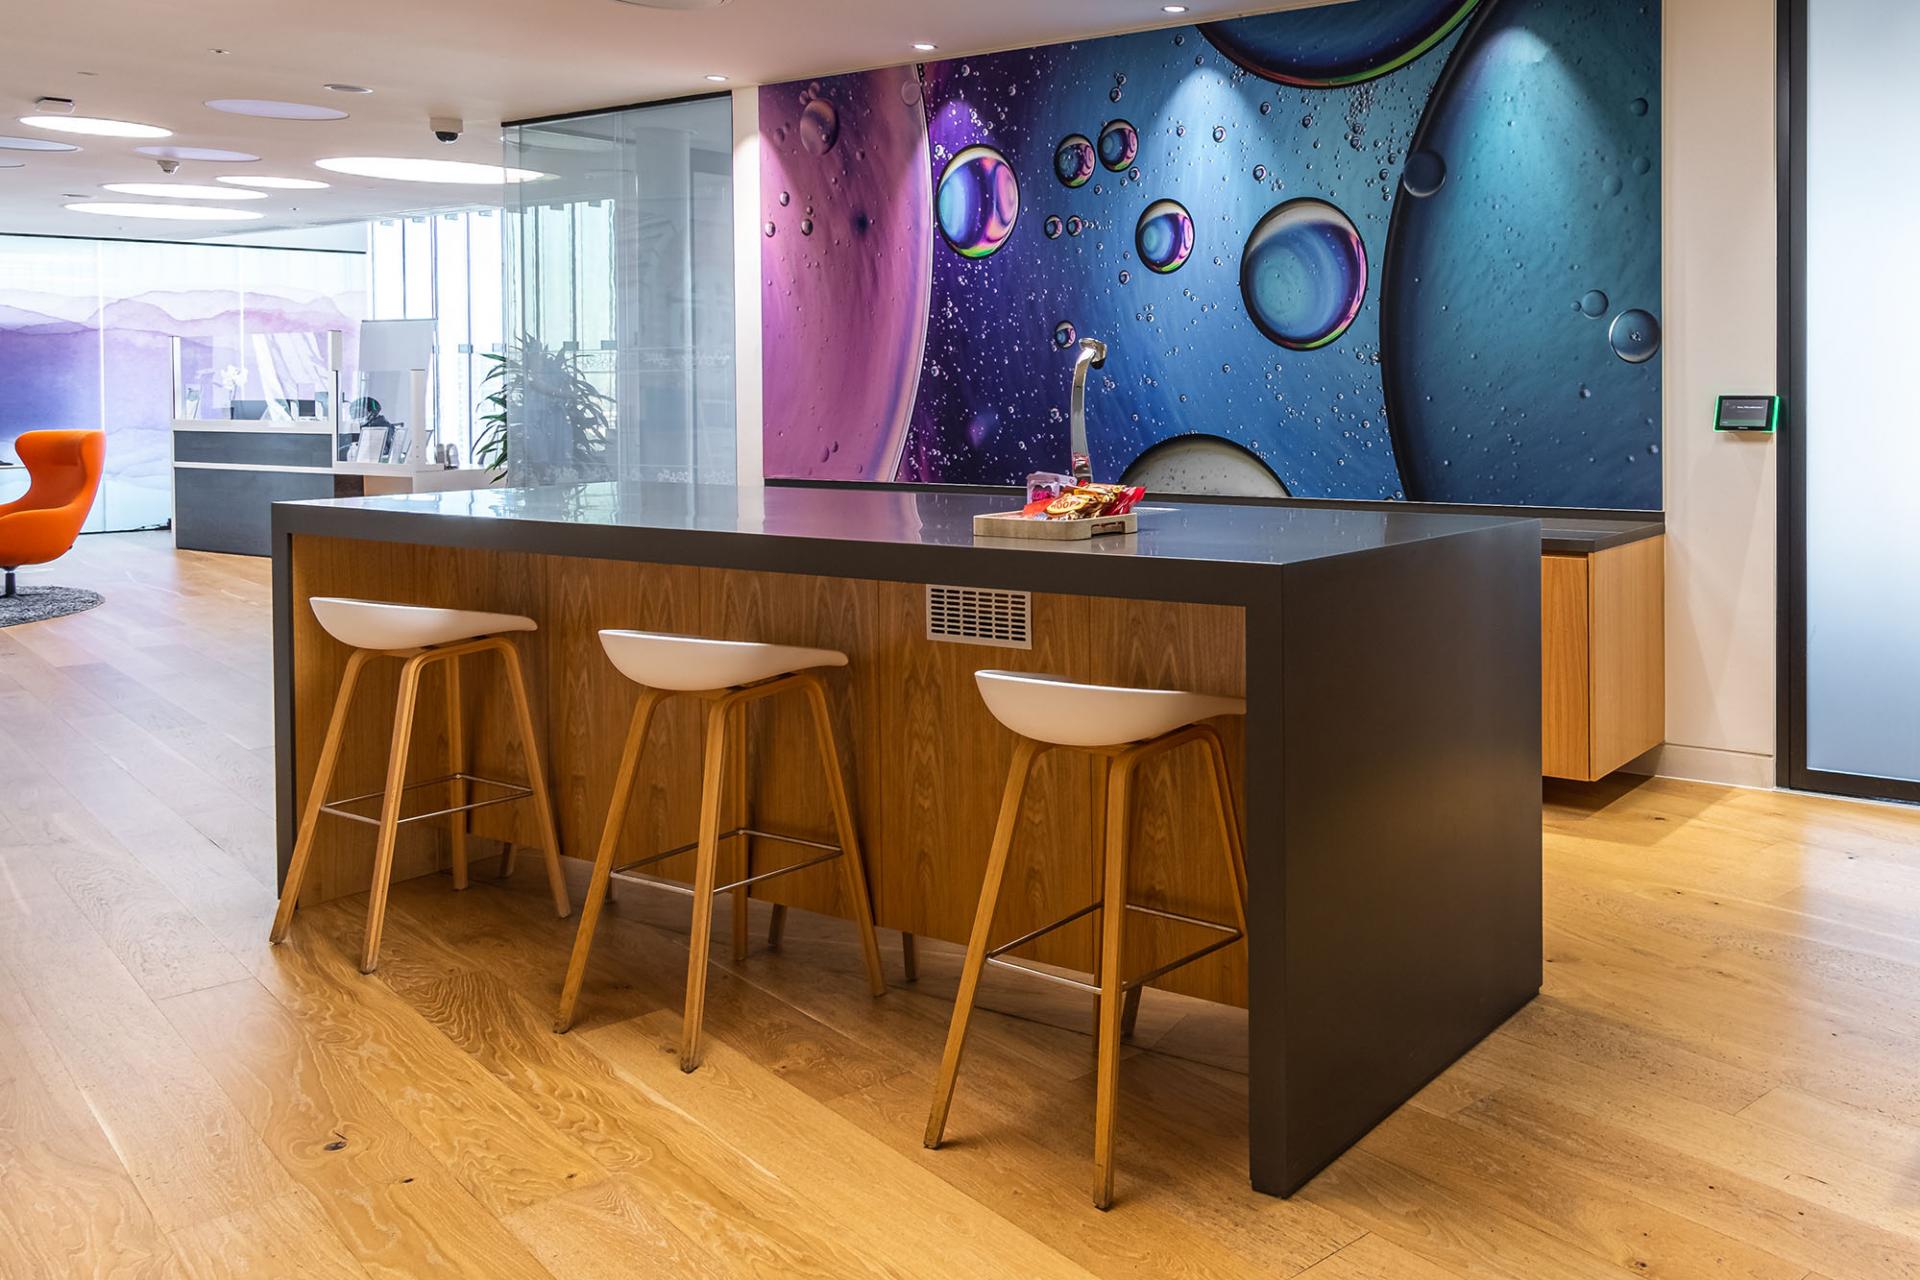 A gathering spot with a sink at the Vertex Pharmaceuticals international headquarters in London